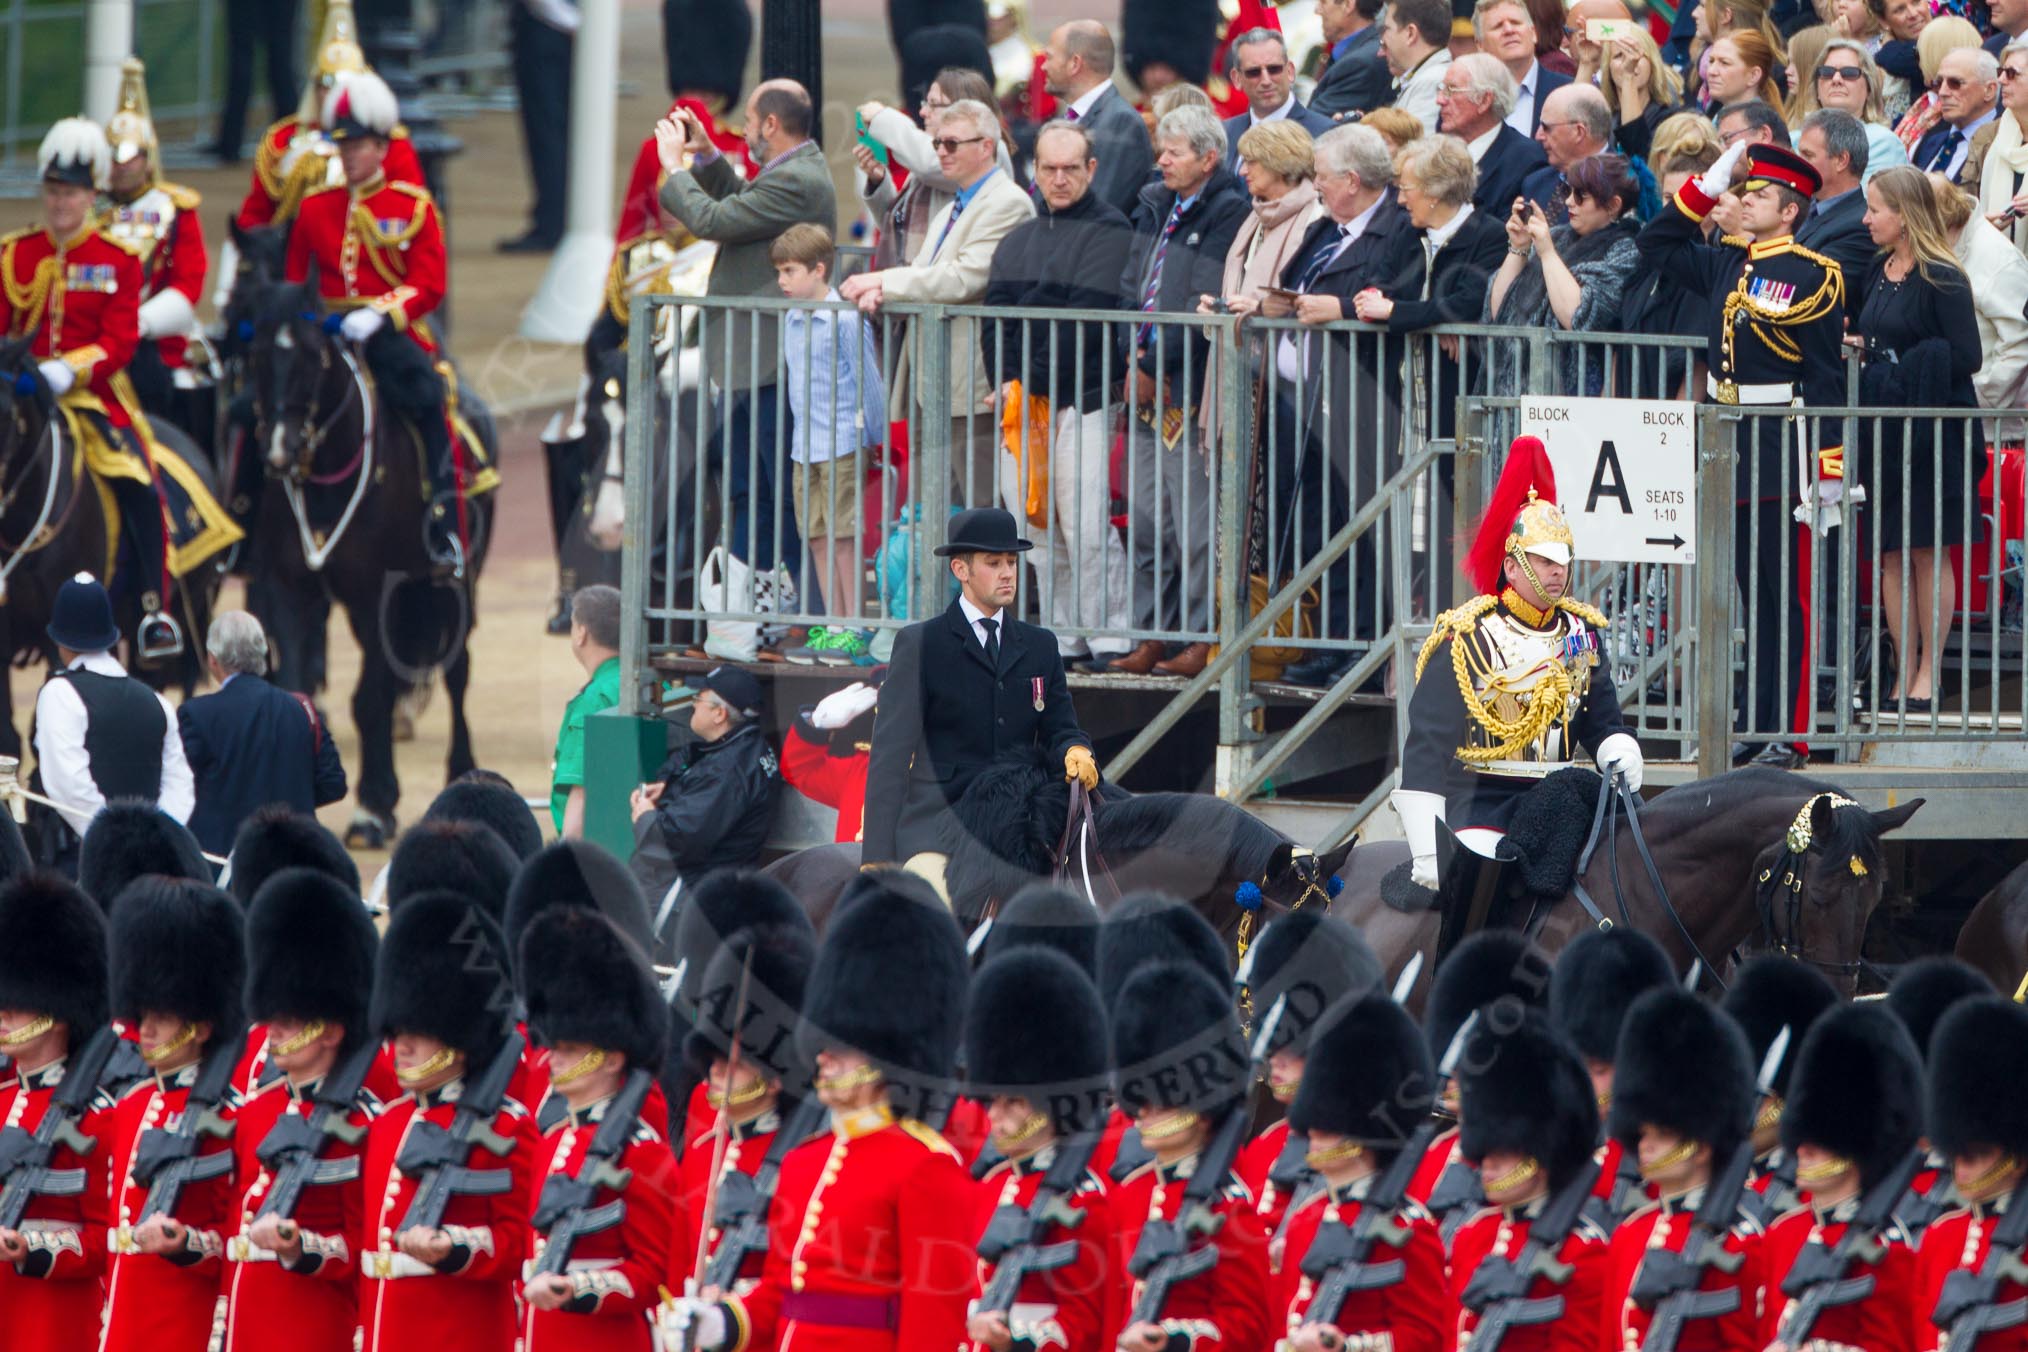 The Colonel's Review 2016.
Horse Guards Parade, Westminster,
London,

United Kingdom,
on 04 June 2016 at 10:58, image #156